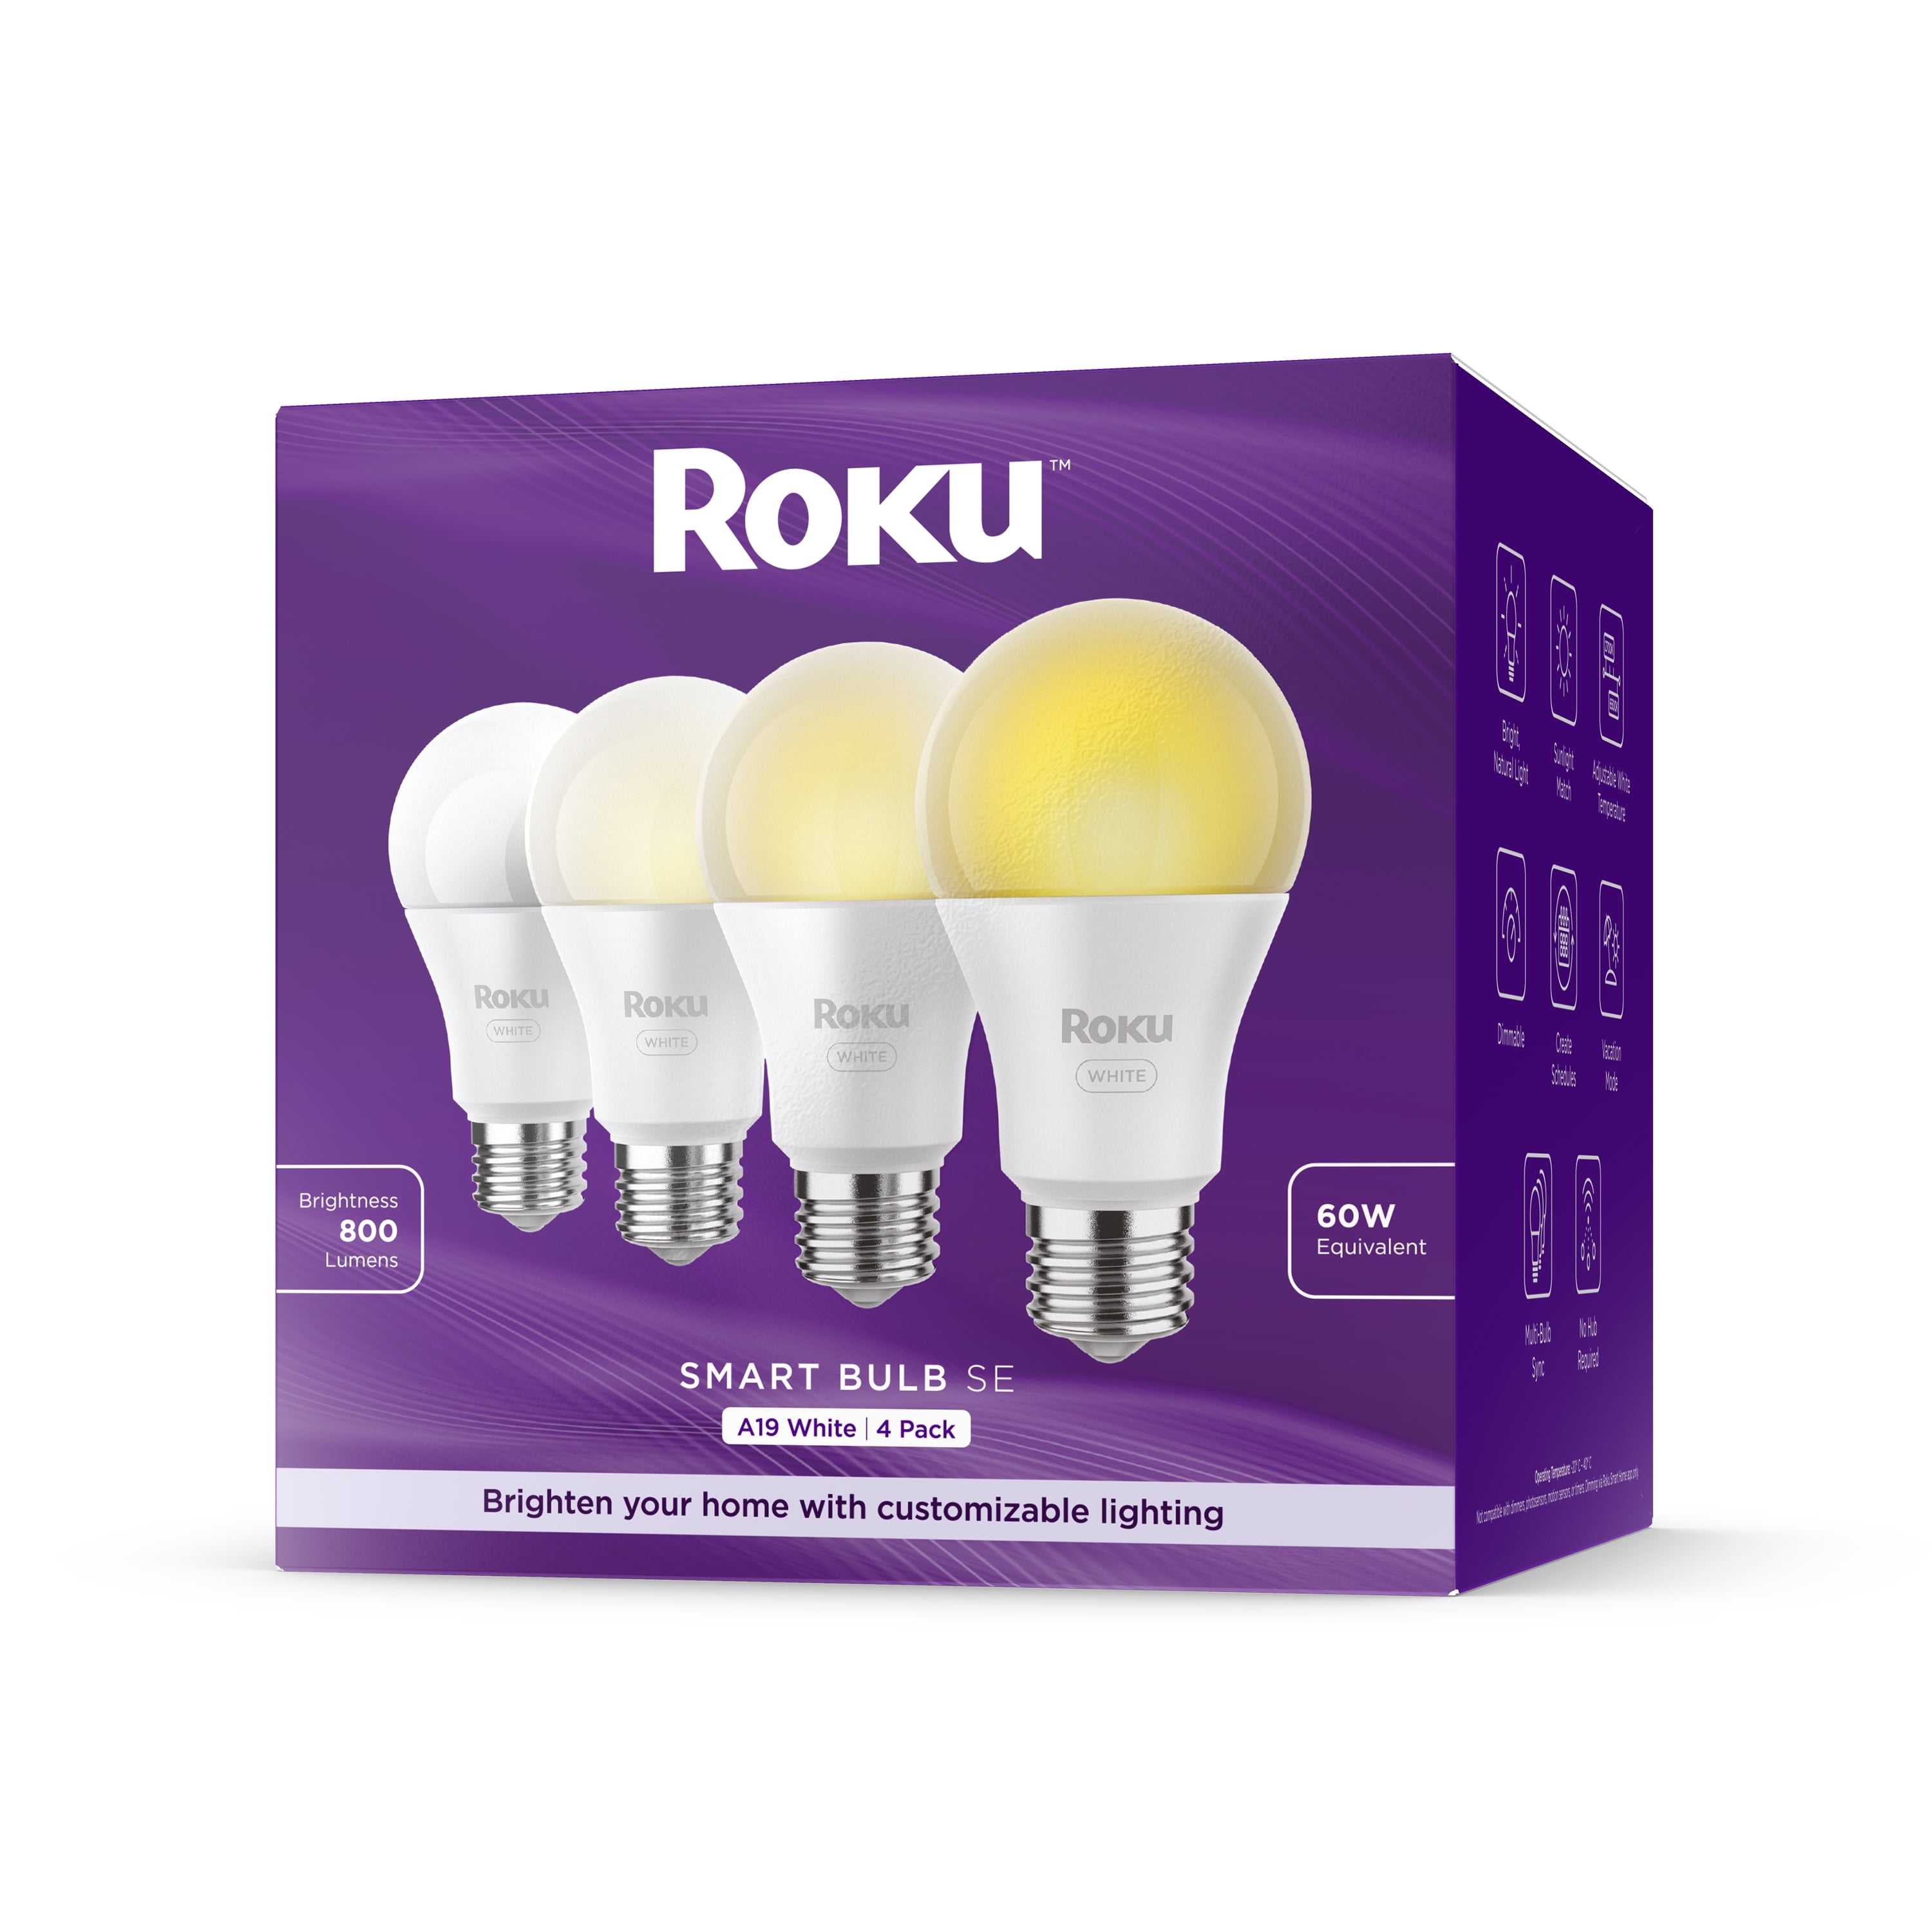 Roku Smart Home Smart Bulb SE (White) 4-Pack with Adjustable Brightness and Temperature - 9.5 Watts